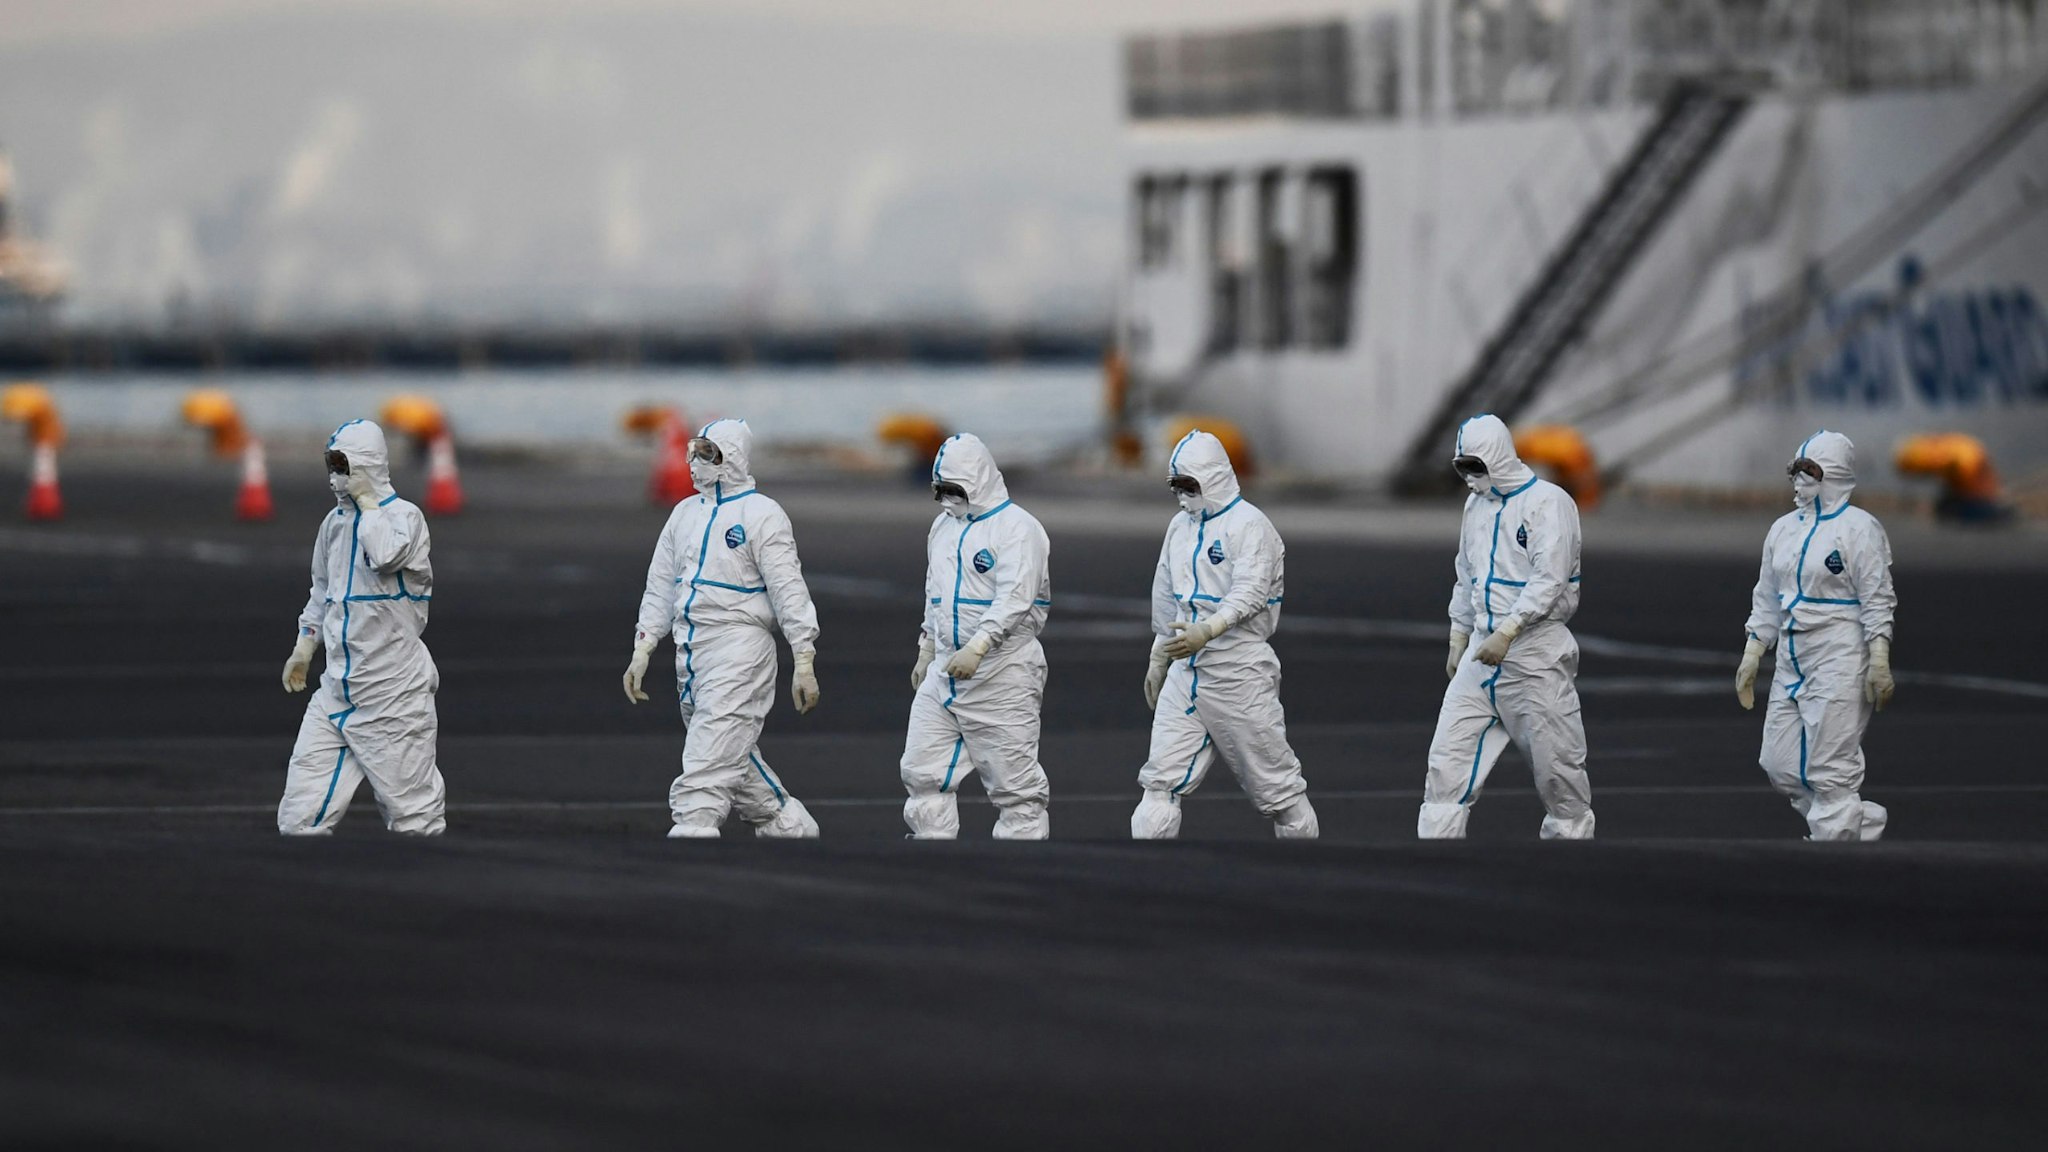 People wearing protective suits walk from the Diamond Princess cruise ship, with around 3,600 people quarantined onboard due to fears of the new coronavirus, at the Daikoku Pier Cruise Terminal in Yokohama port on February 10, 2020.